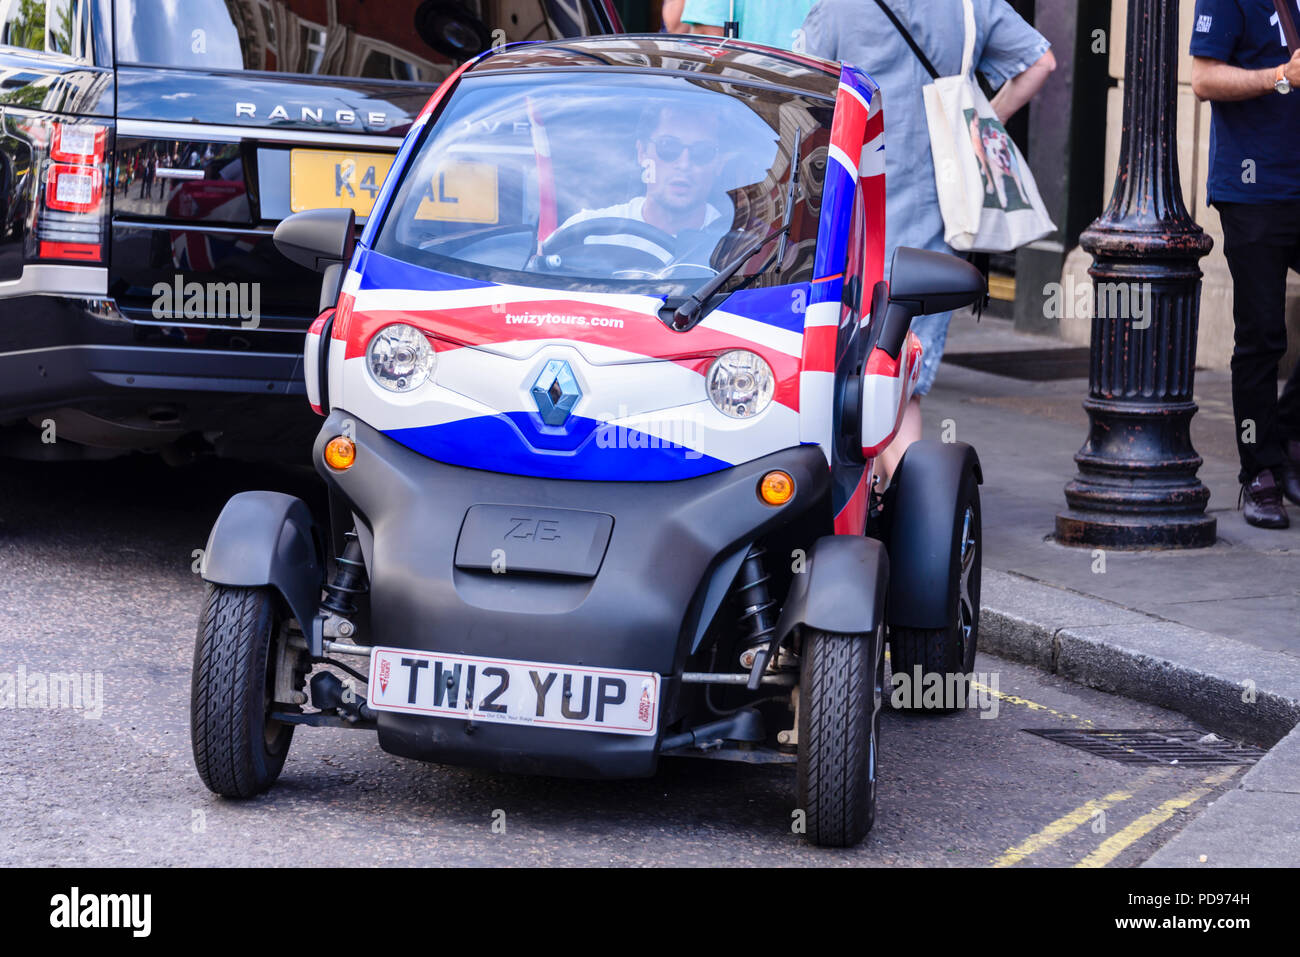 Renault Twizy two seat electric car with Union Jack vinyl wrap used to give tourists a tour around London. Stock Photo